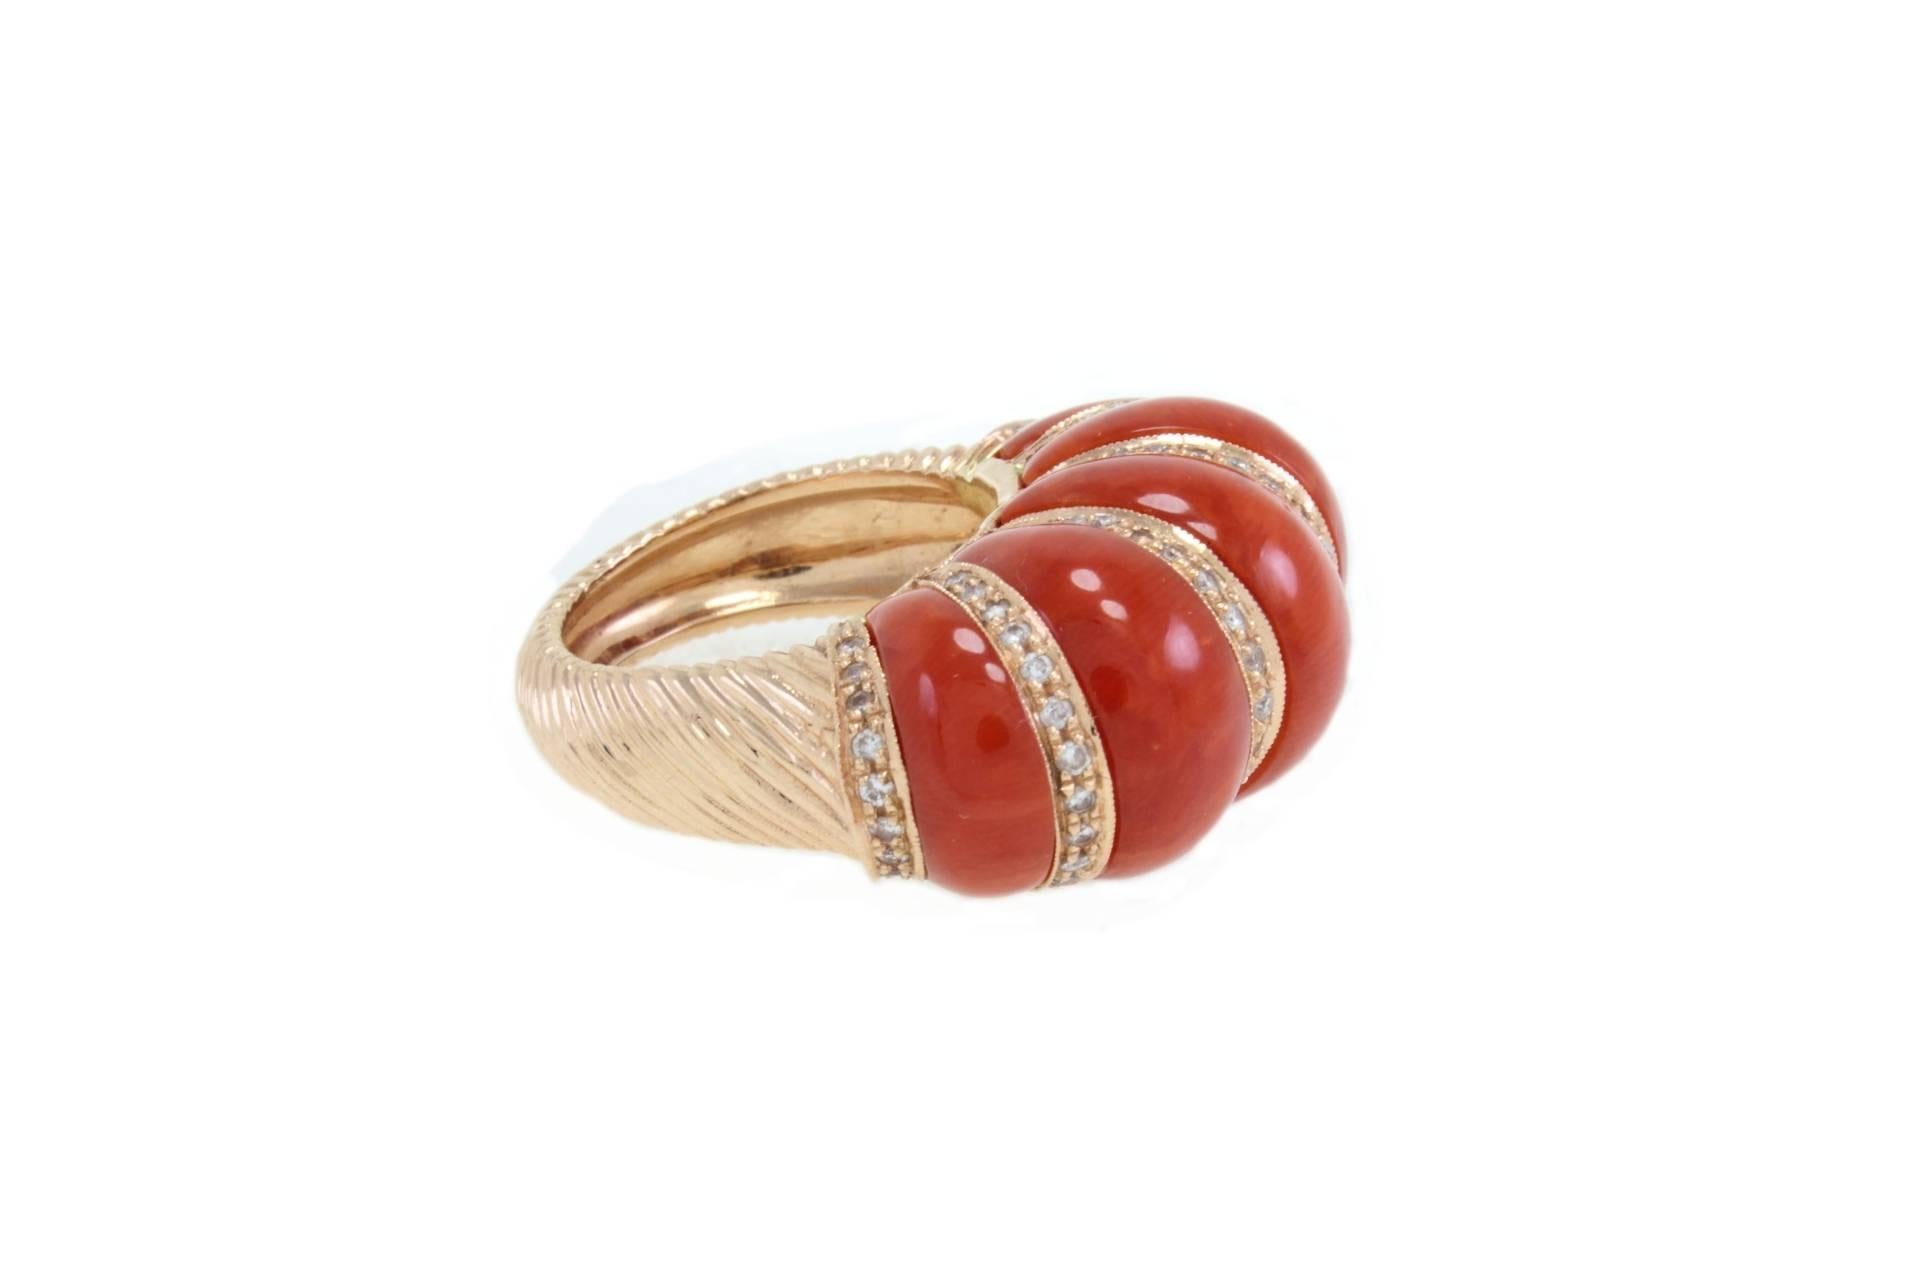 SHIPPING POLICY:
No additional costs will be added to this order.
Shipping costs will be totally covered by the seller (customs duties included).

Coral ring in14kt yellow gold with six diamonds strips.
diamonds ( 0.60 kt )
coral ( 5.90 gr ).
total